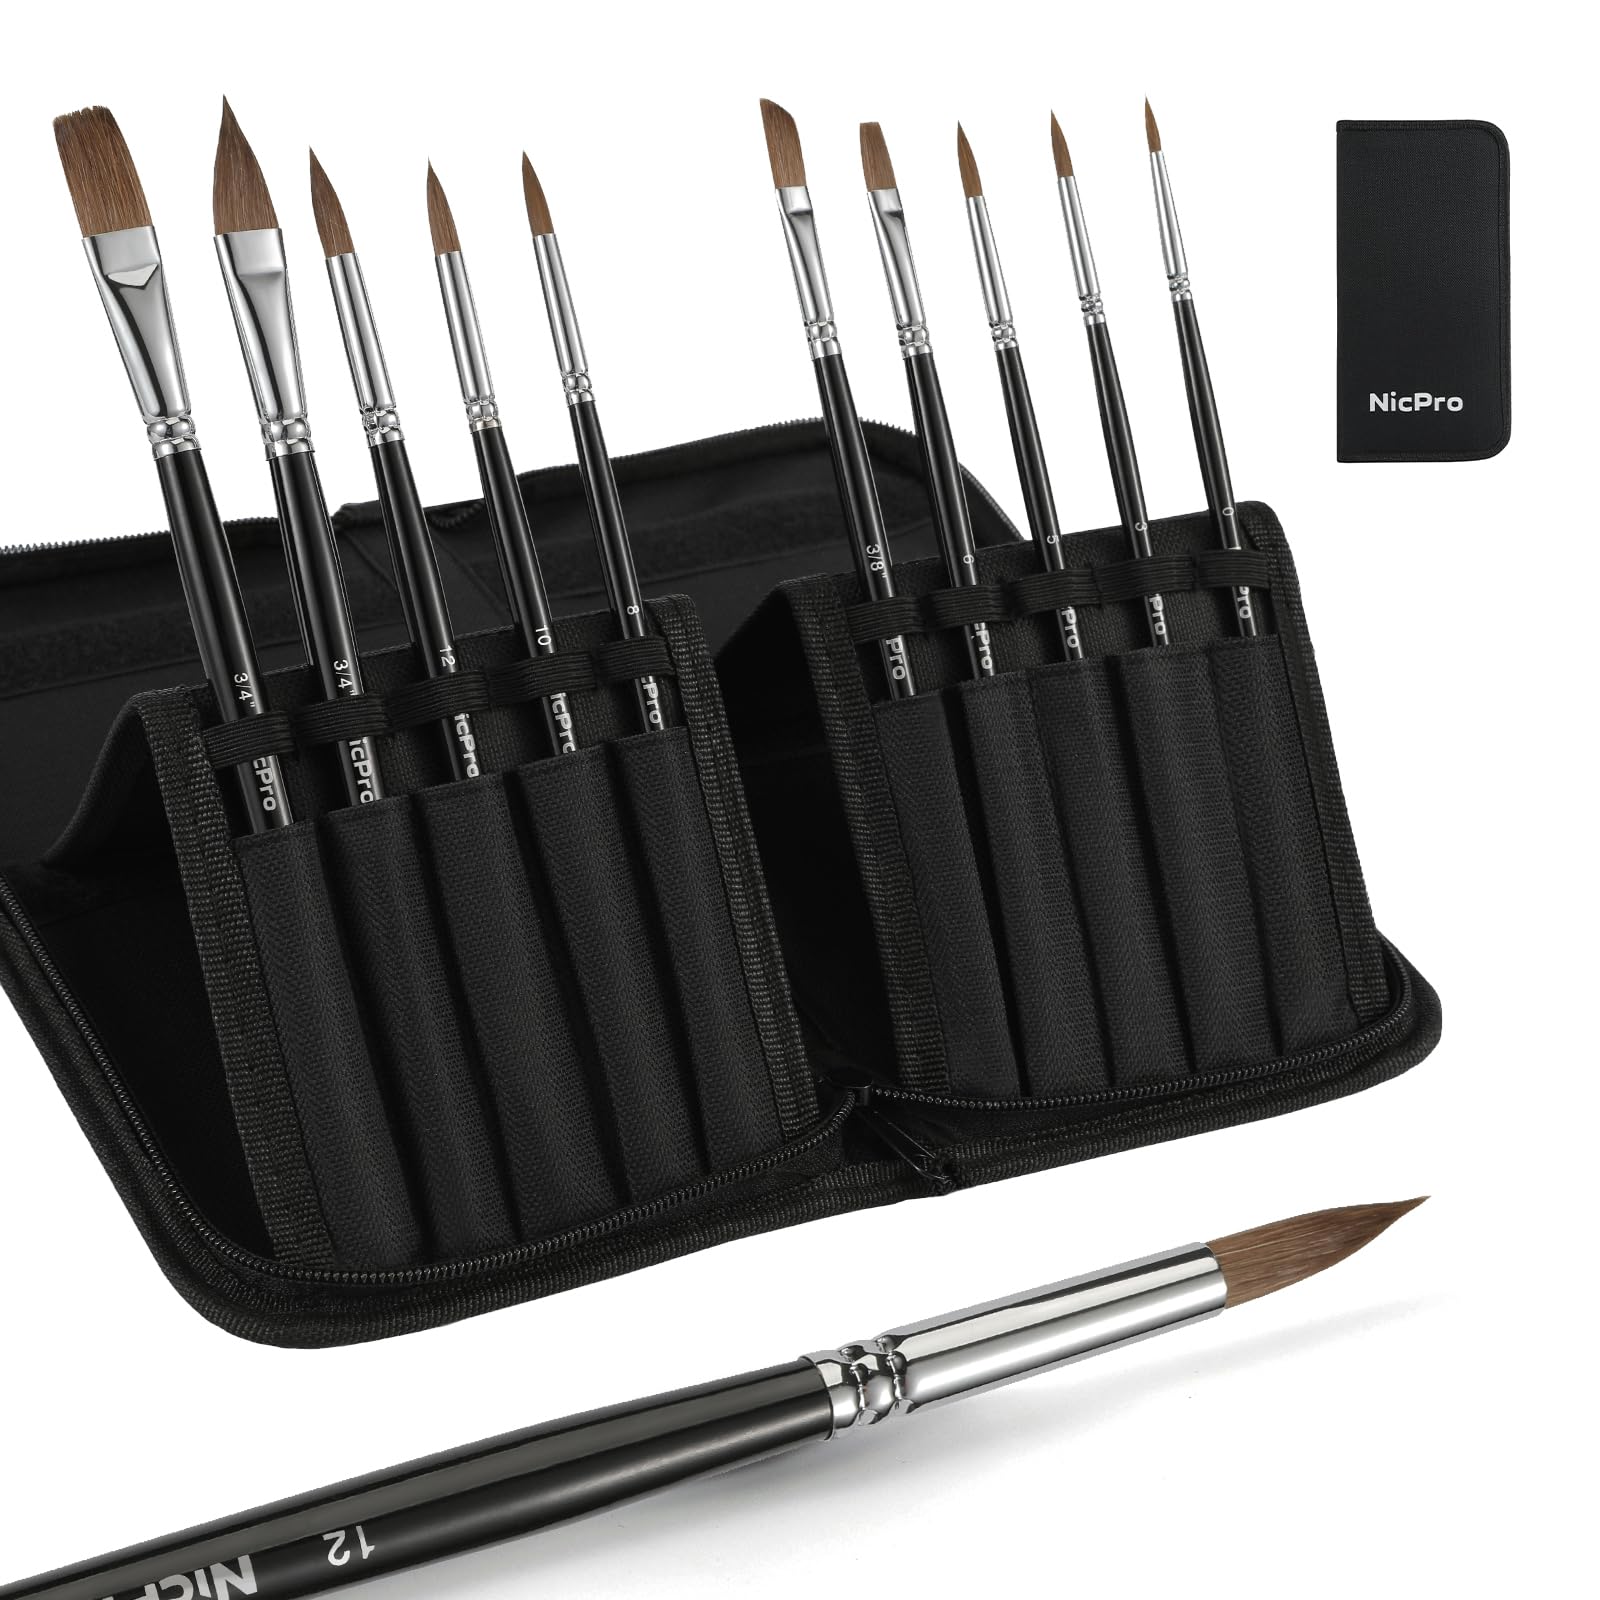 Nicpro Micro Detail Paint Brush Set 15 Small Professional Artist Miniature  Fine Detail Brushes for Art Watercolor Oil Acrylic Craft Models Rock Painting  Citadel & Paint by Number -Come with Holder Brown